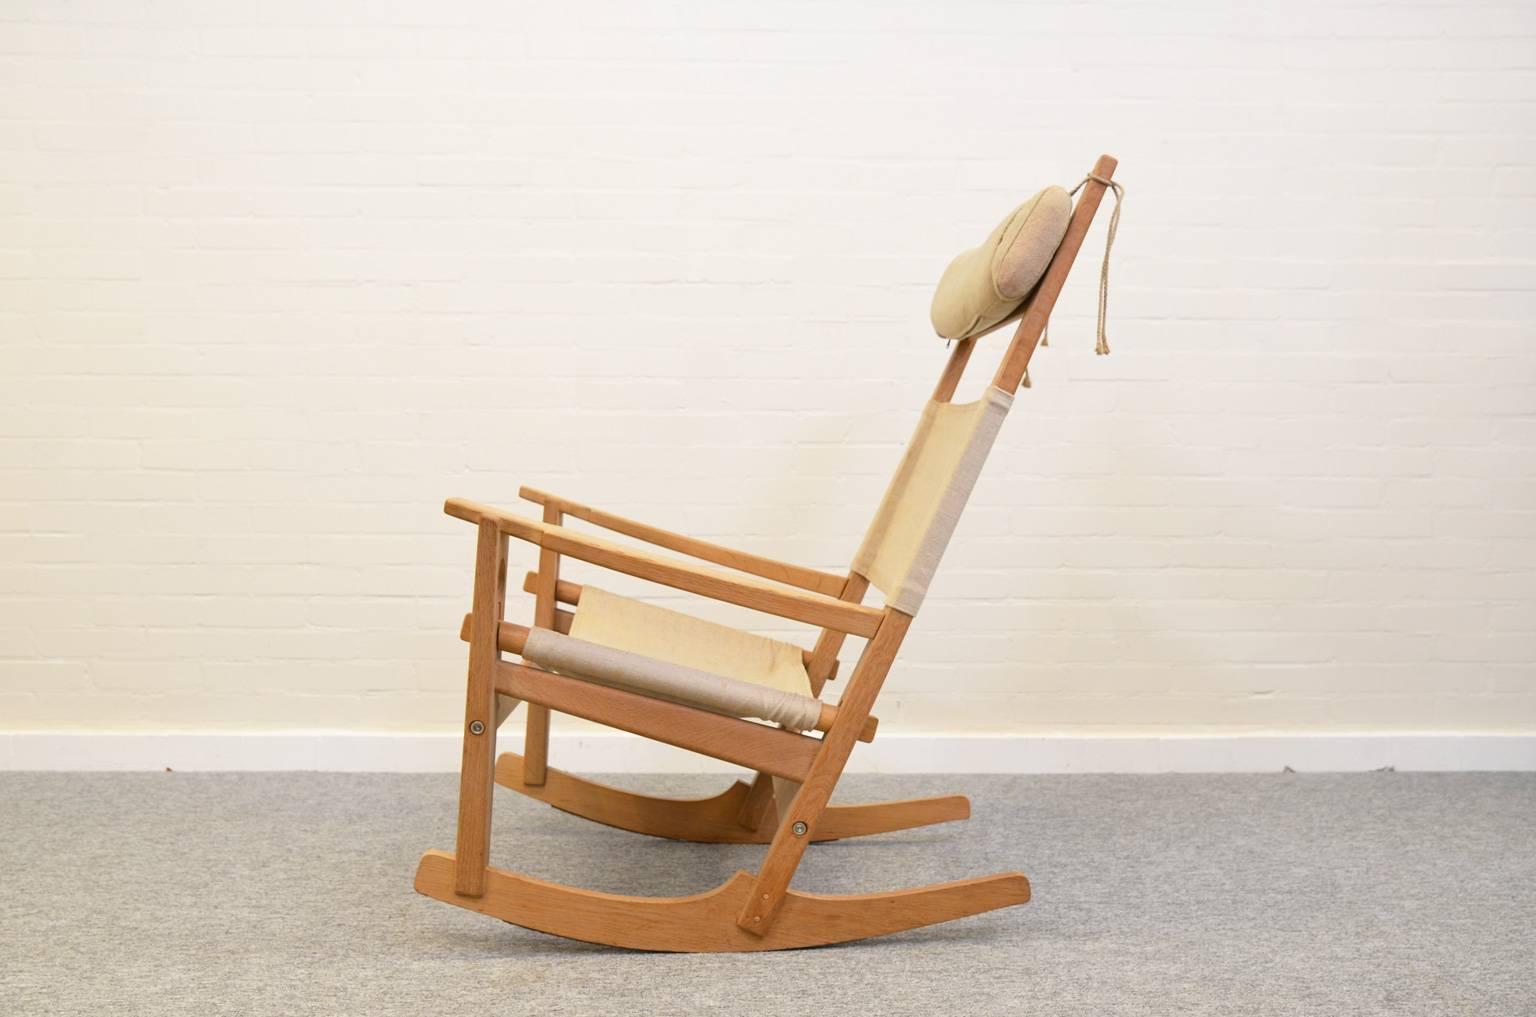 Rocking chair (model 673) is designed by Hans J. Wegner and manufactured by GETAMA A/S, Denmark. The chair has an unique shaped frame made of oak, which shows immediately why the chair is named Keyhole.
The chair is in a good condition, the fabric